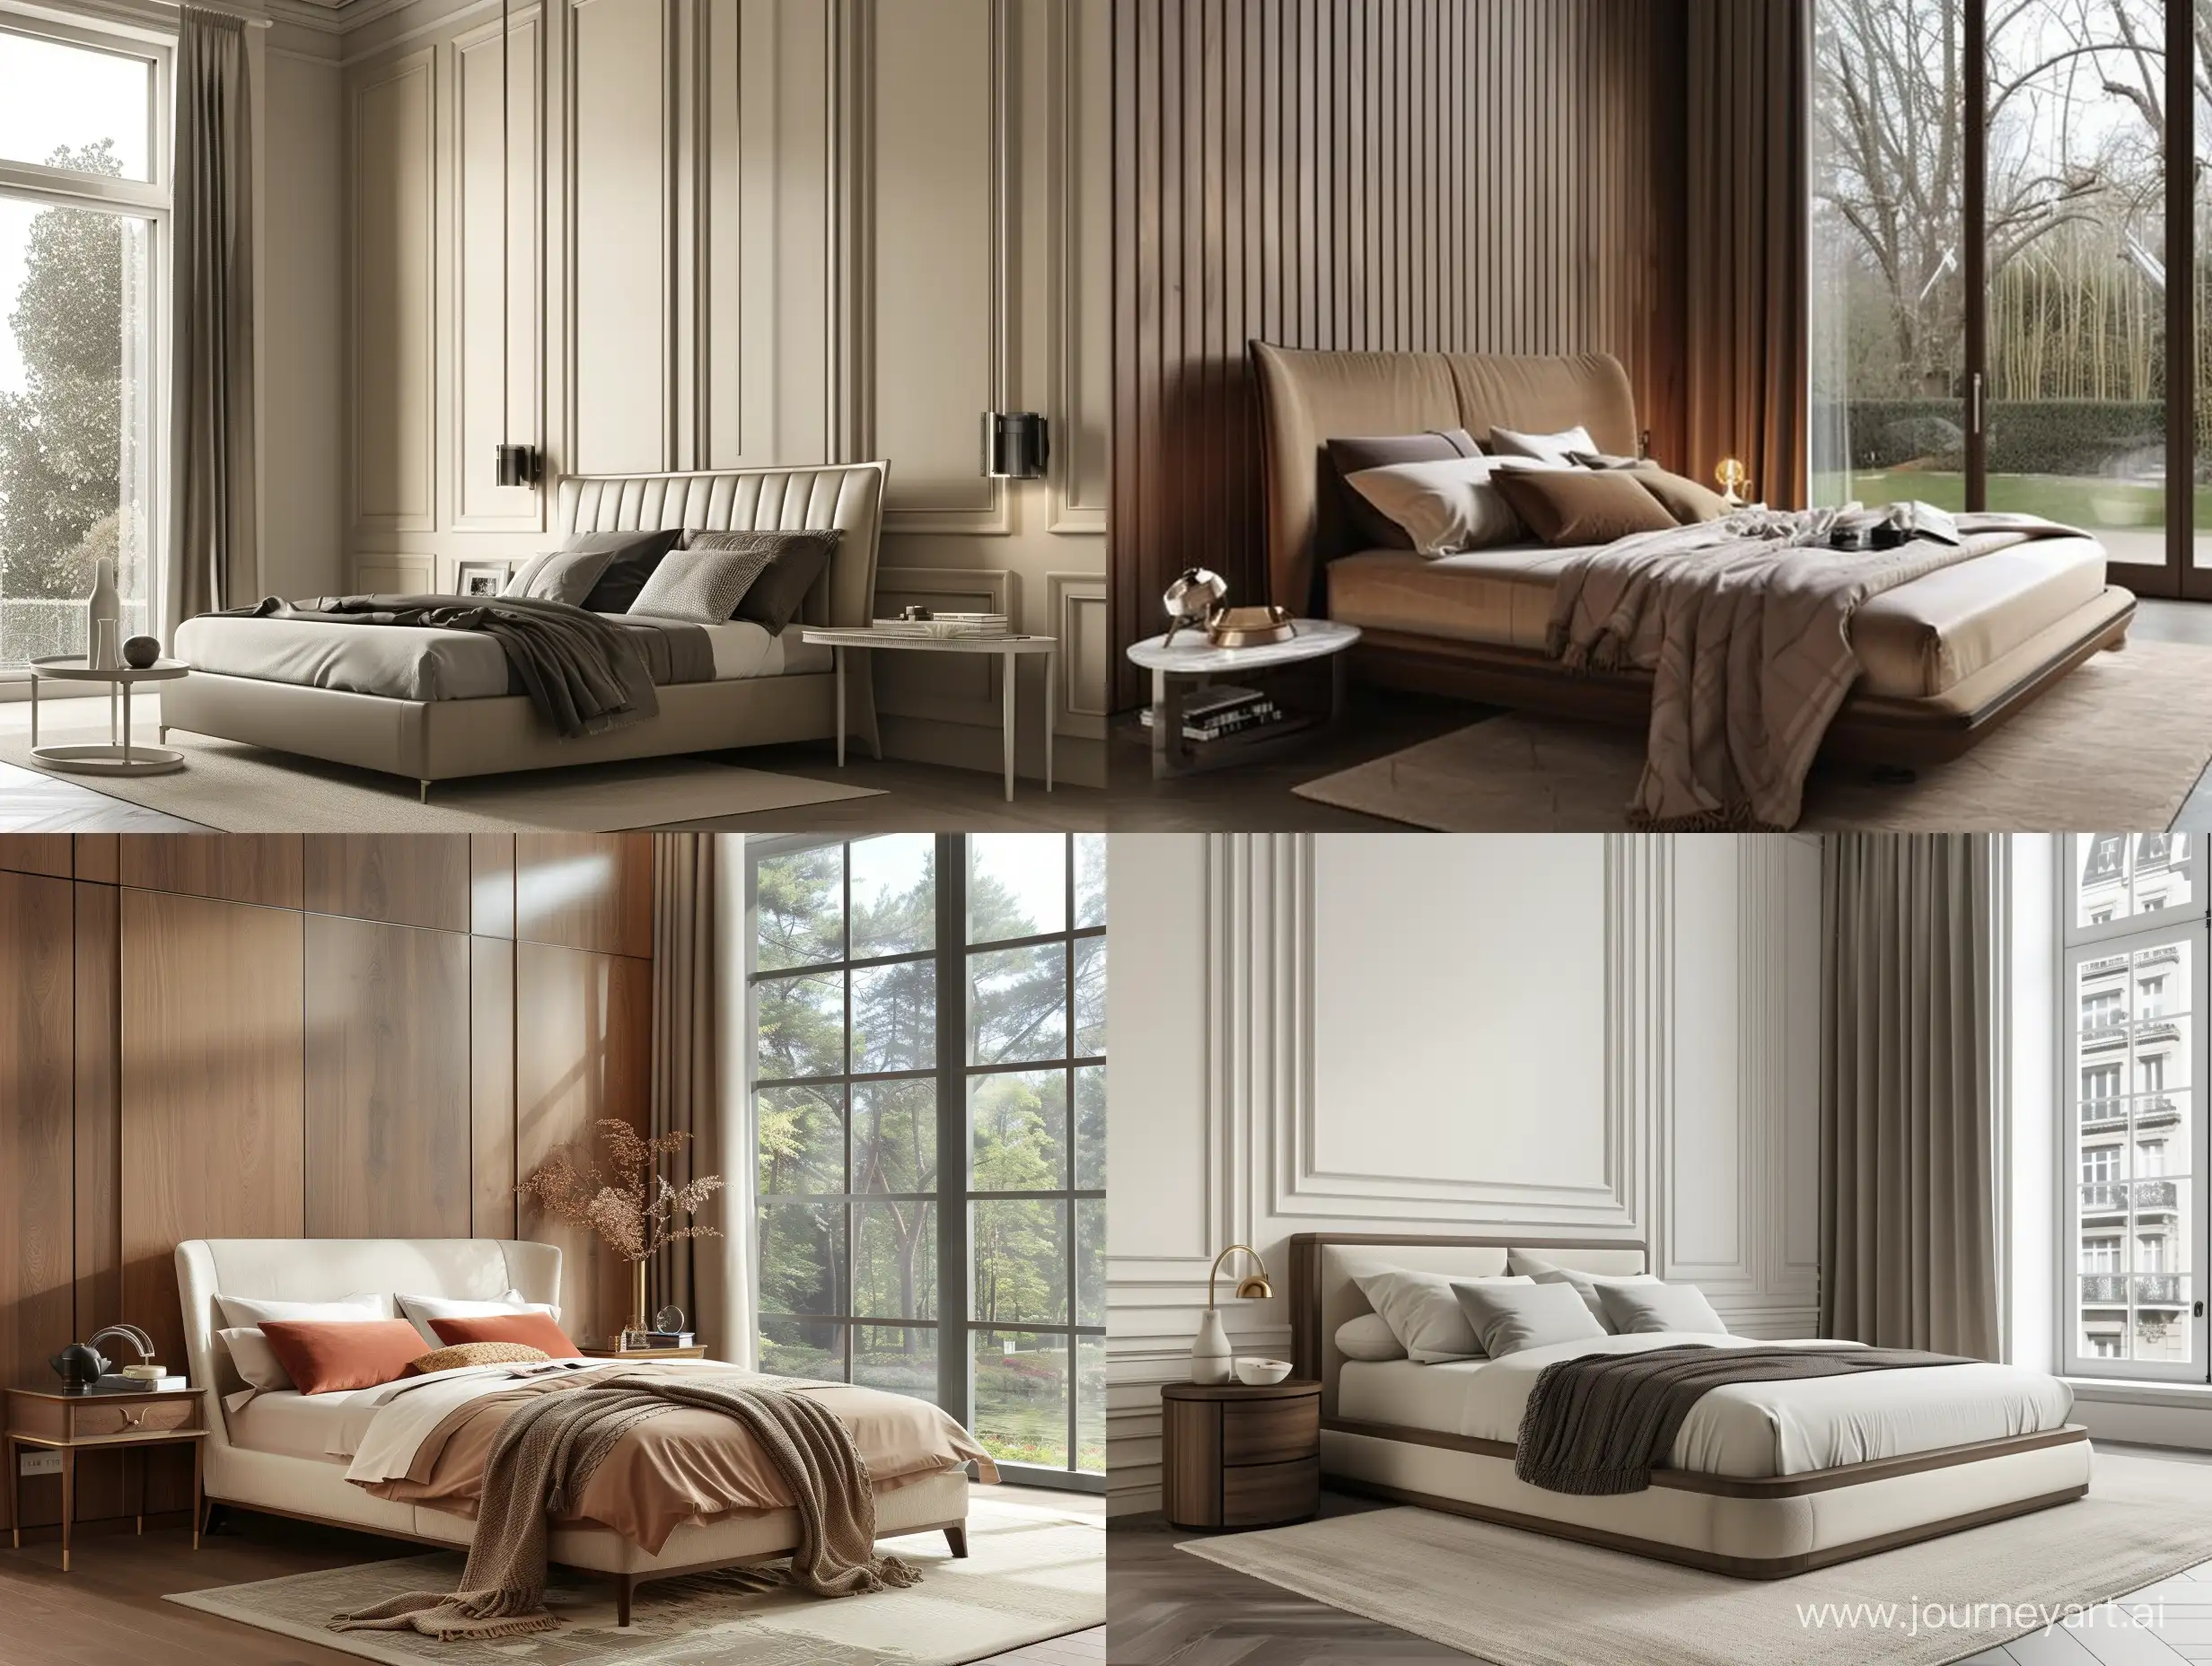 Modern greco roman luxurious bedroom, wall panelling design, bed side tables. Left side table and 50%20of bed is overlapping a tall window behind --v 6 --ar 4:3 --no 22903